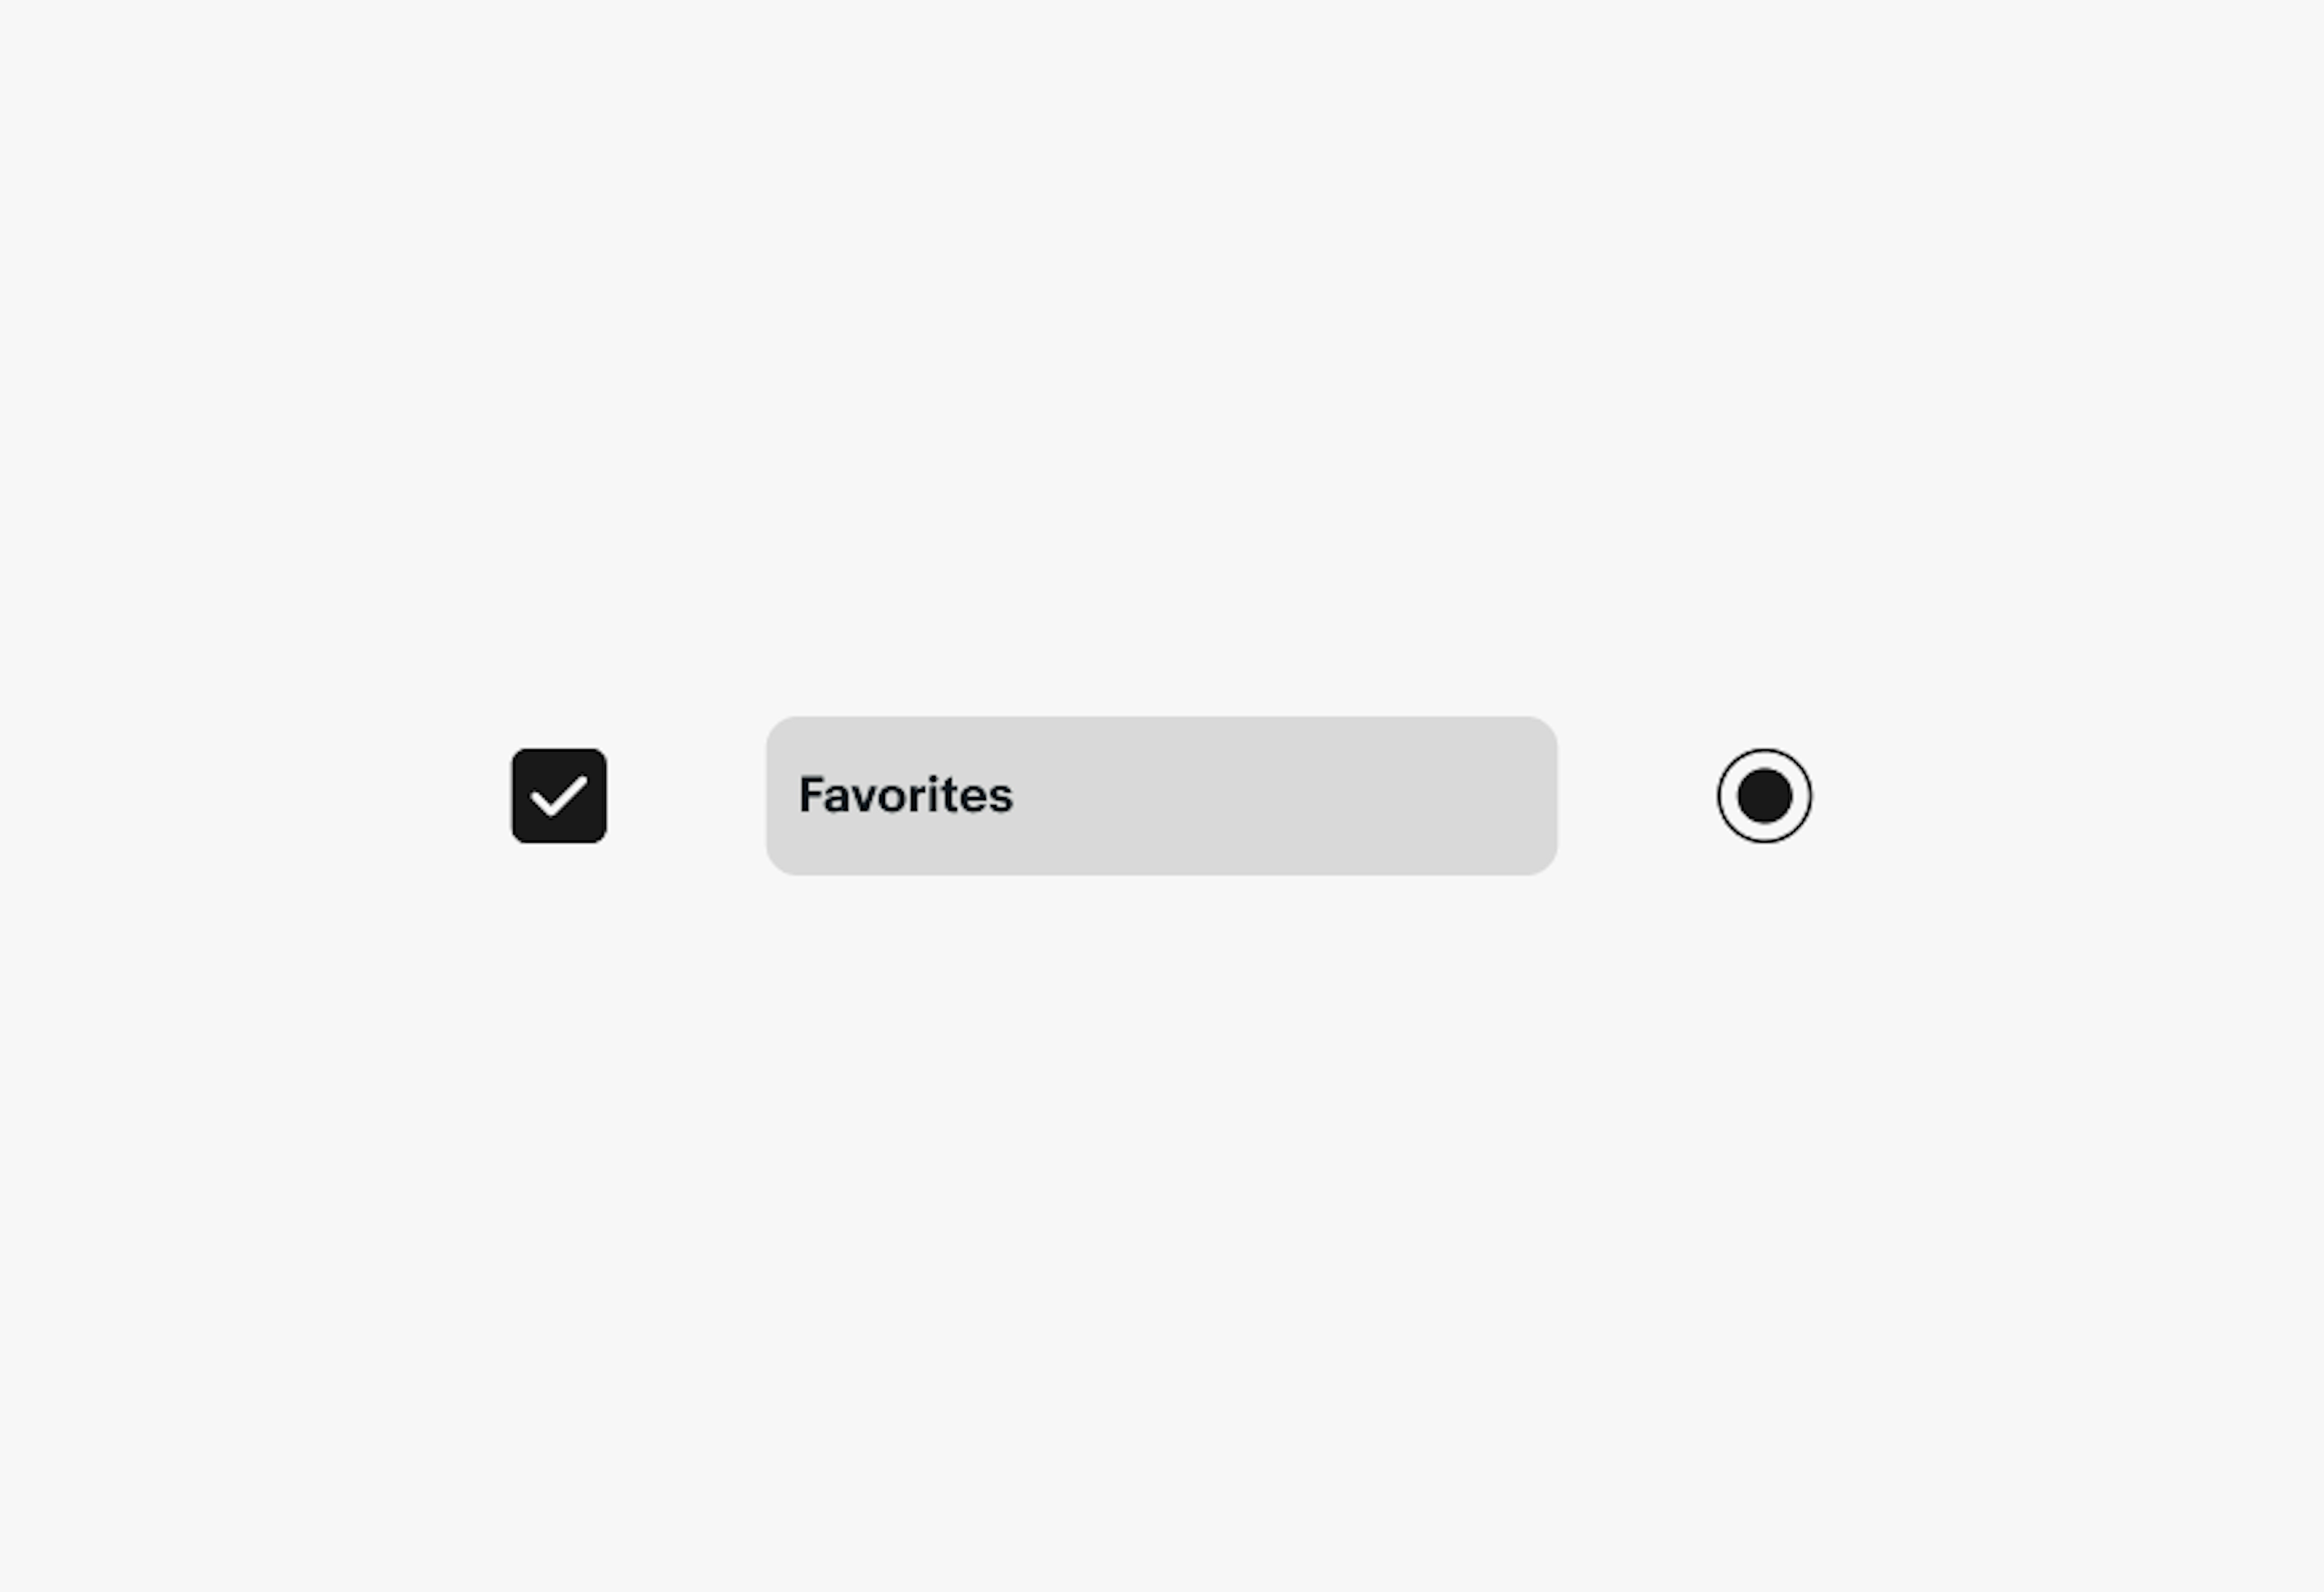 A checkbox, navigation item, and radio button displayed in their selected/active states.